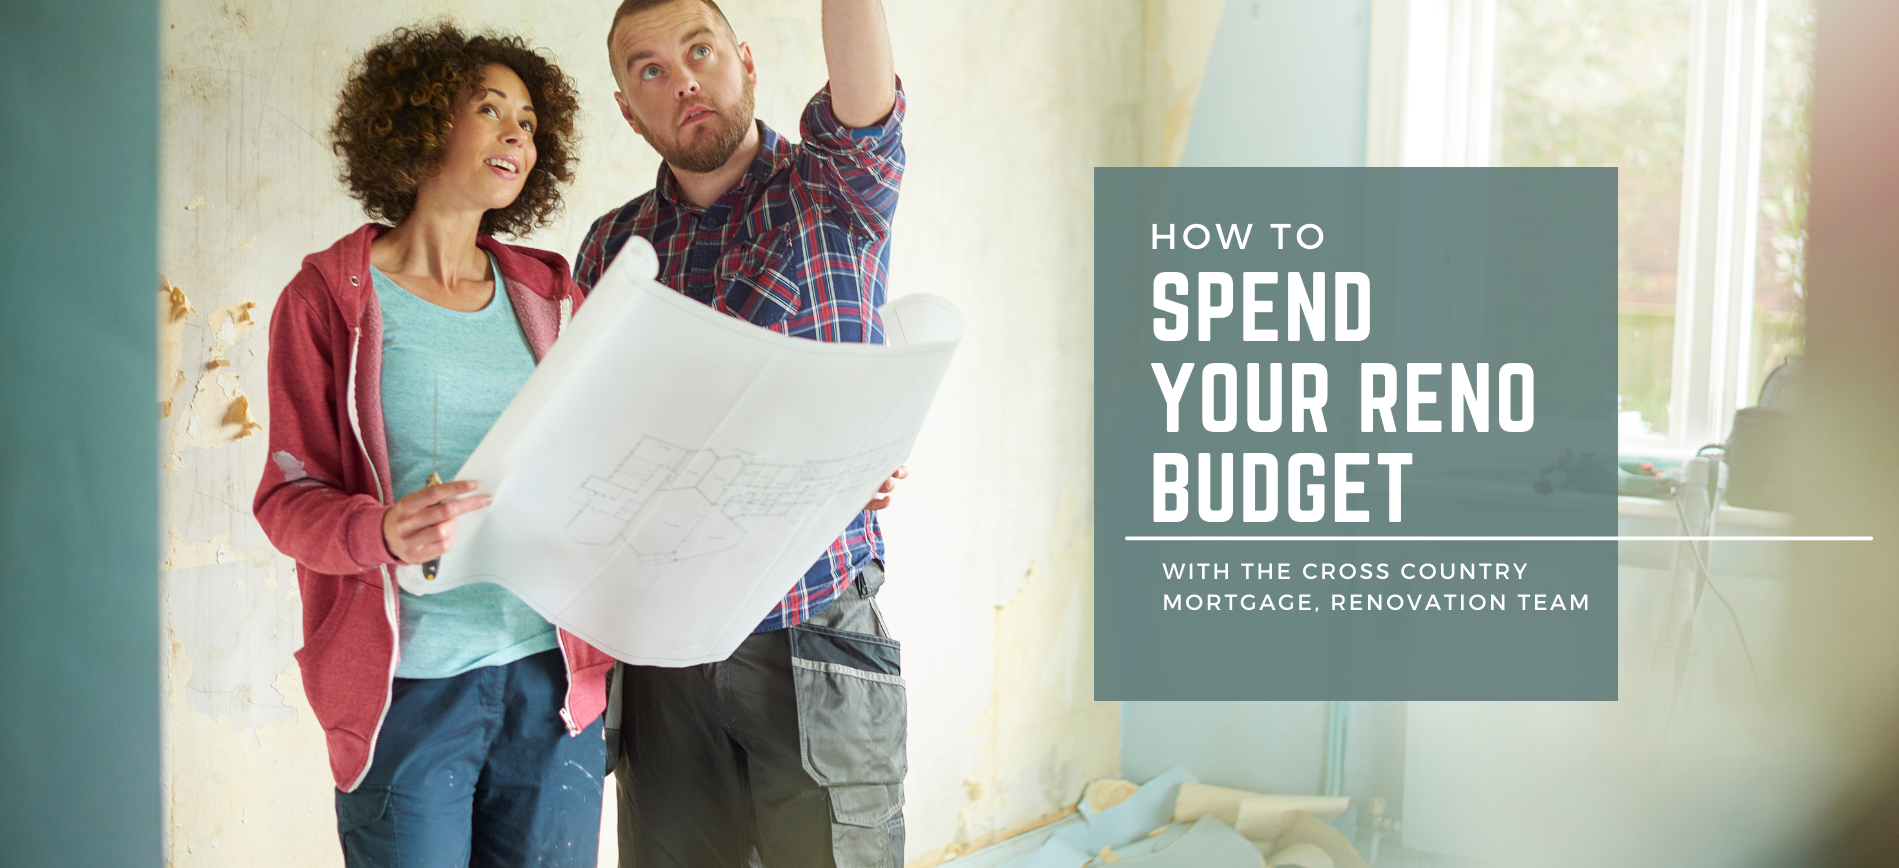 home renovation, budget friendly, designer tips, cross country mortgage